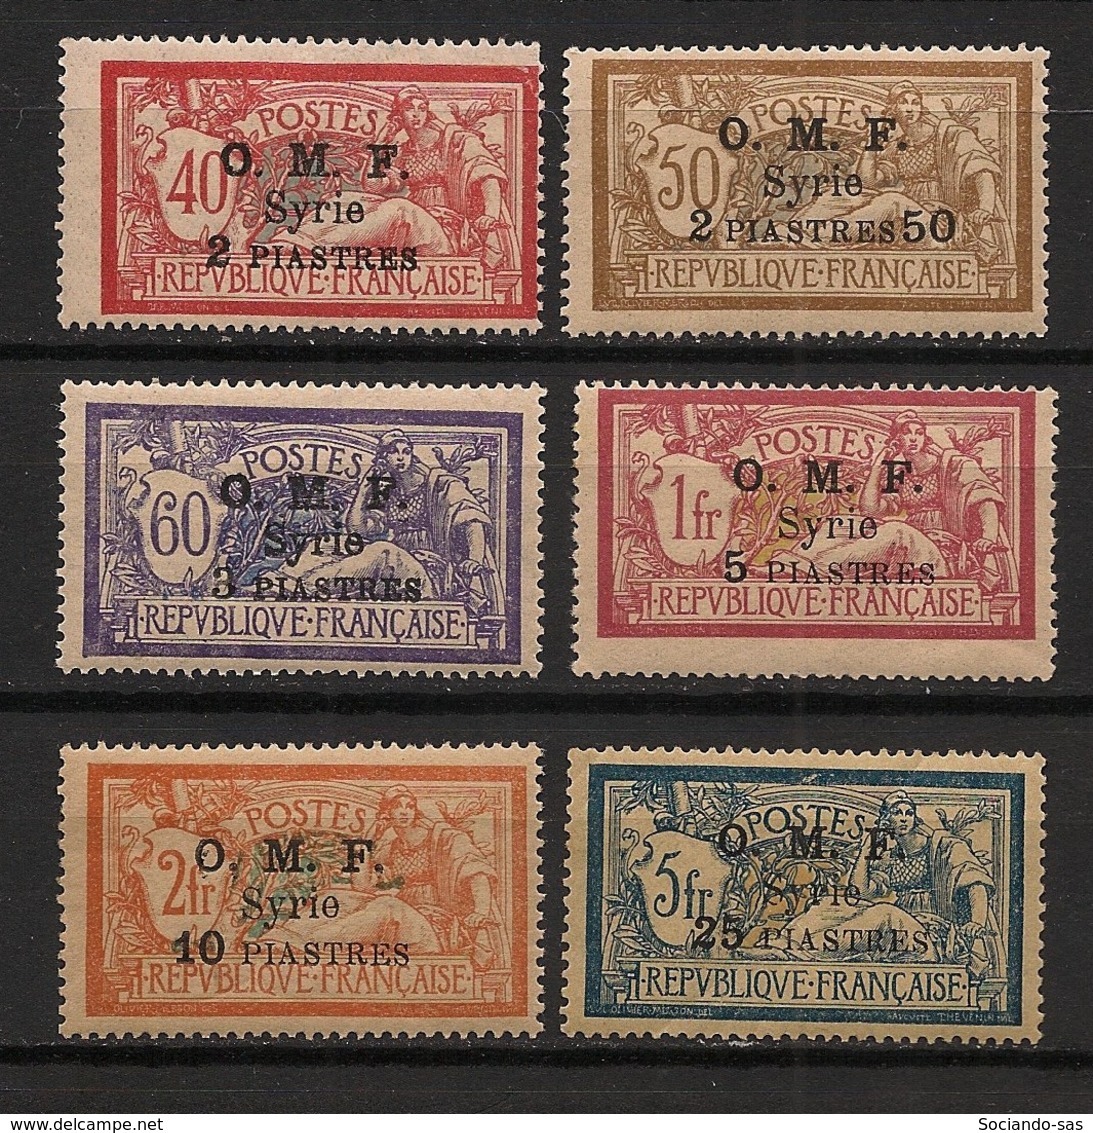 Syrie - 1920-22 - N°Yv. 68 à 73 - Merson - Série Complète - Neuf Luxe ** / MNH / Postfrisch - Unused Stamps